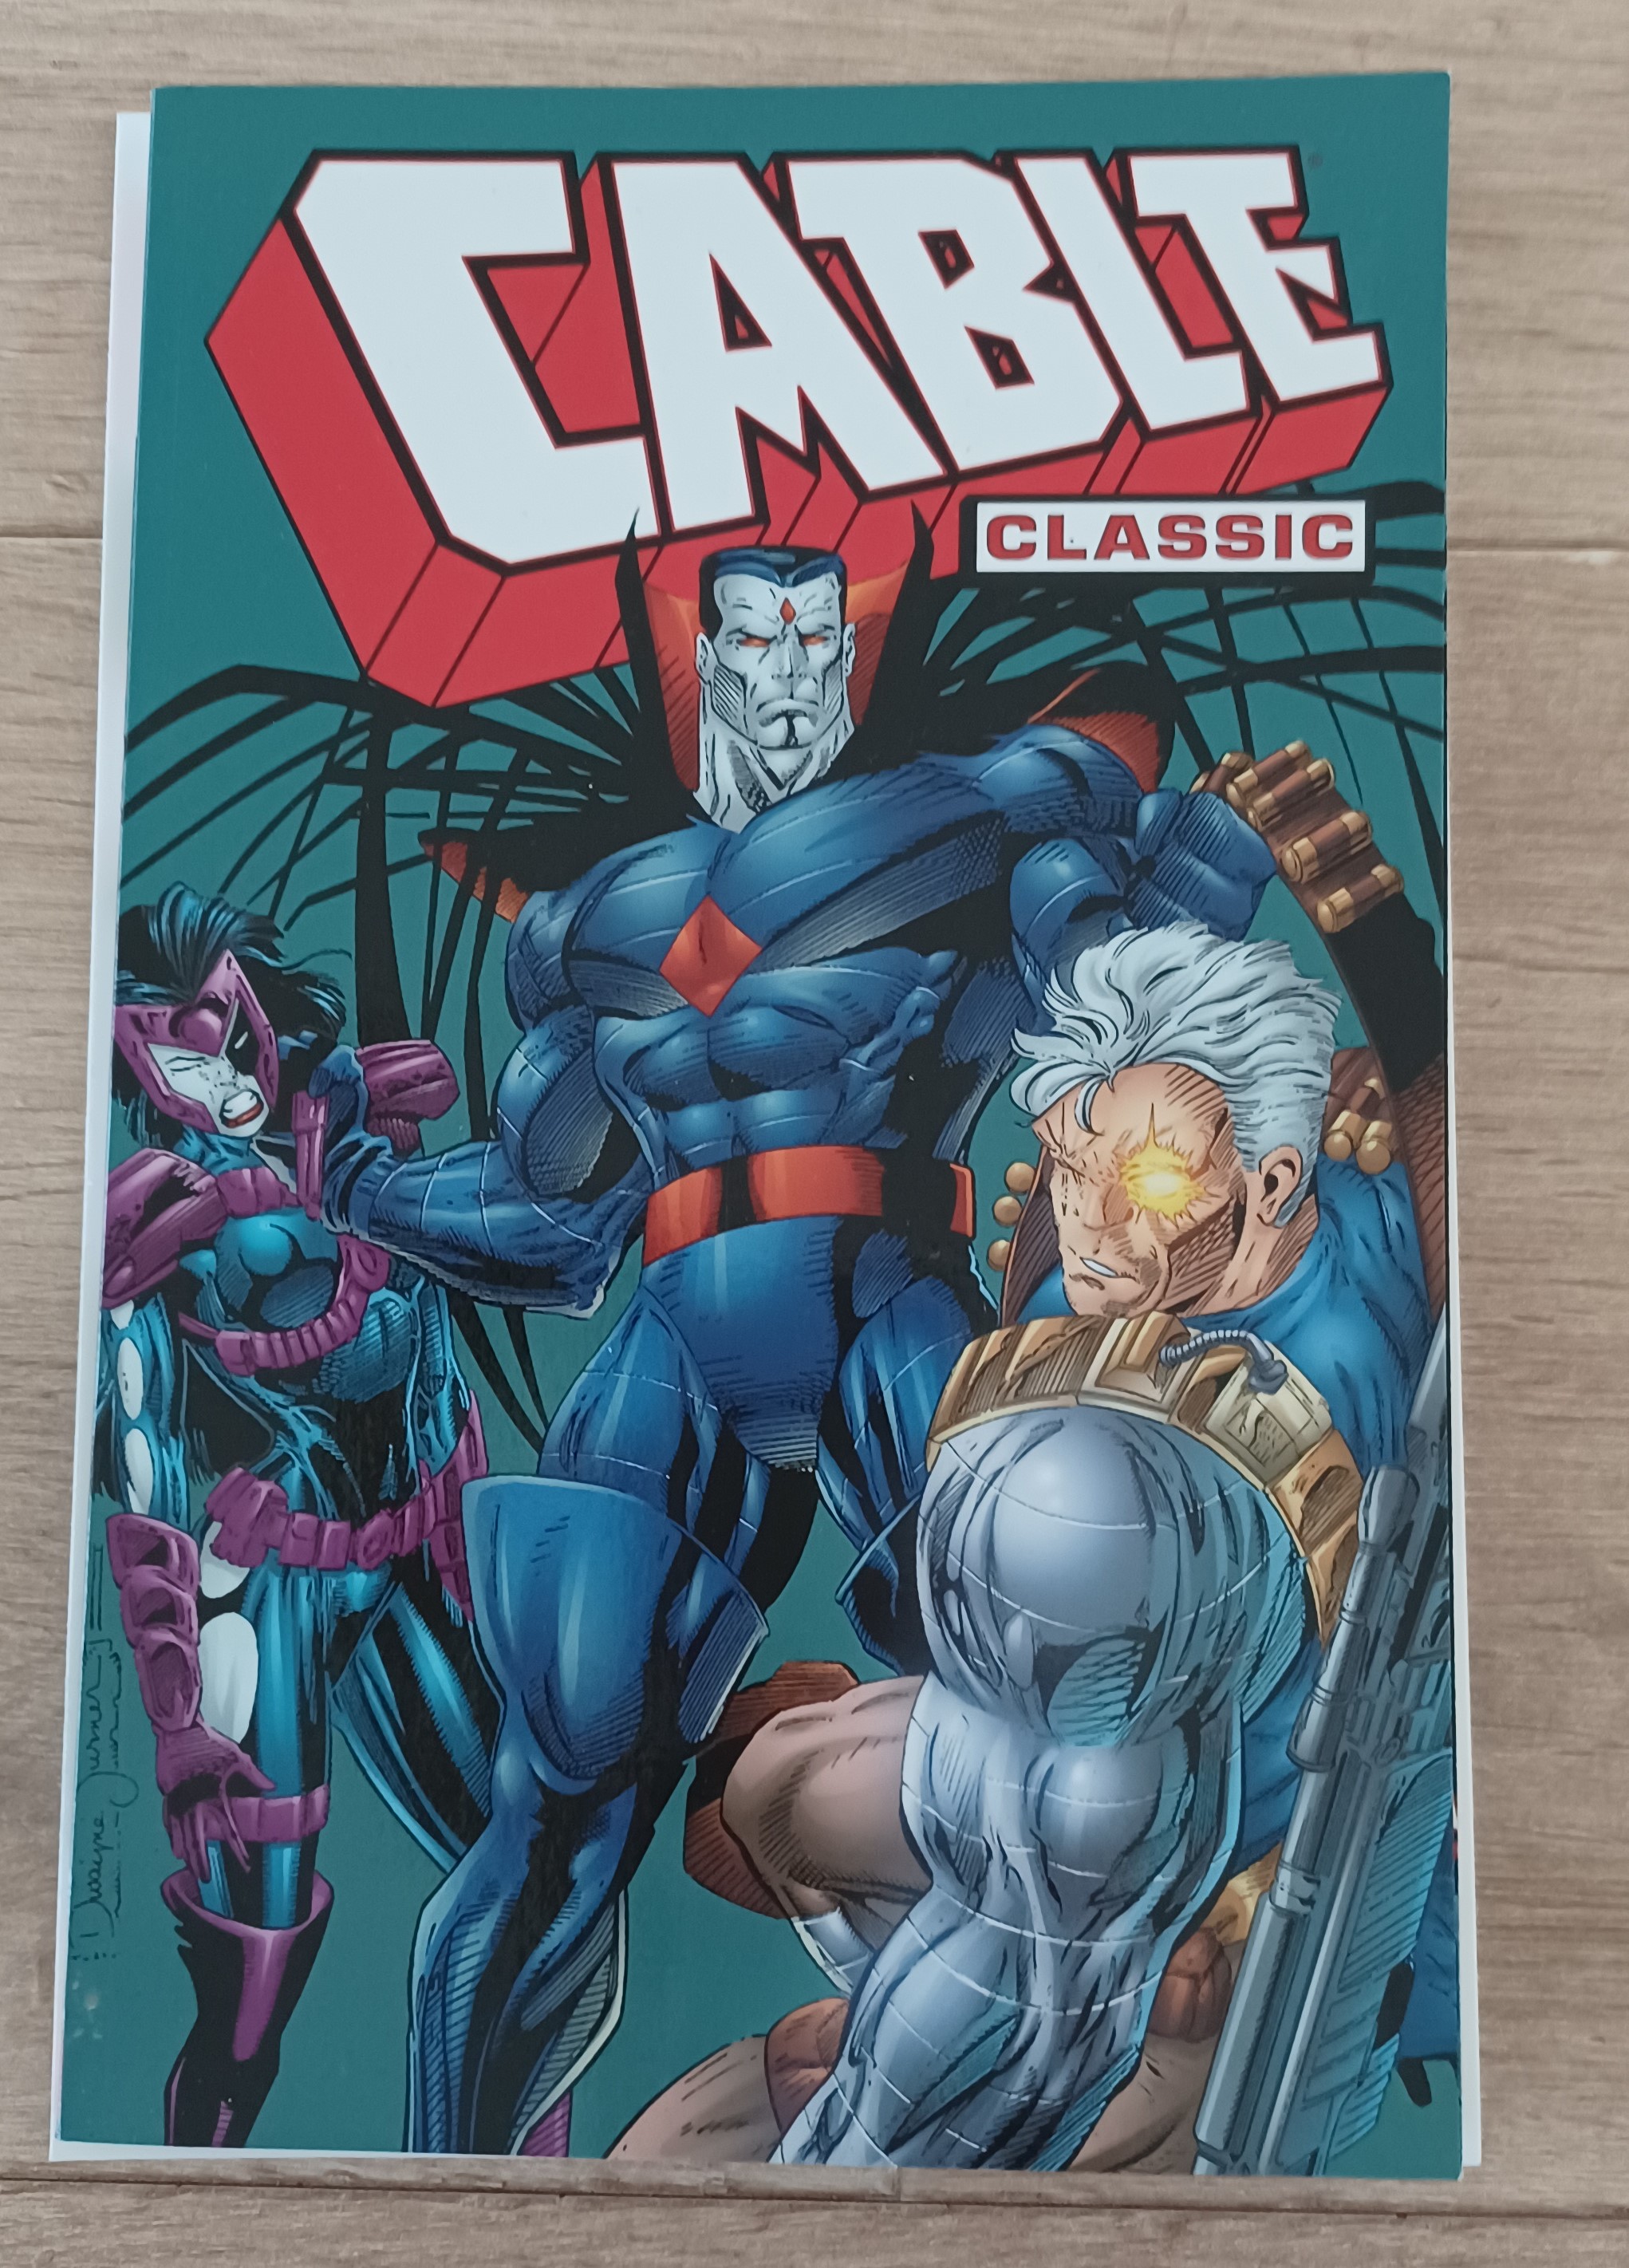 Cable Classic TPB #2